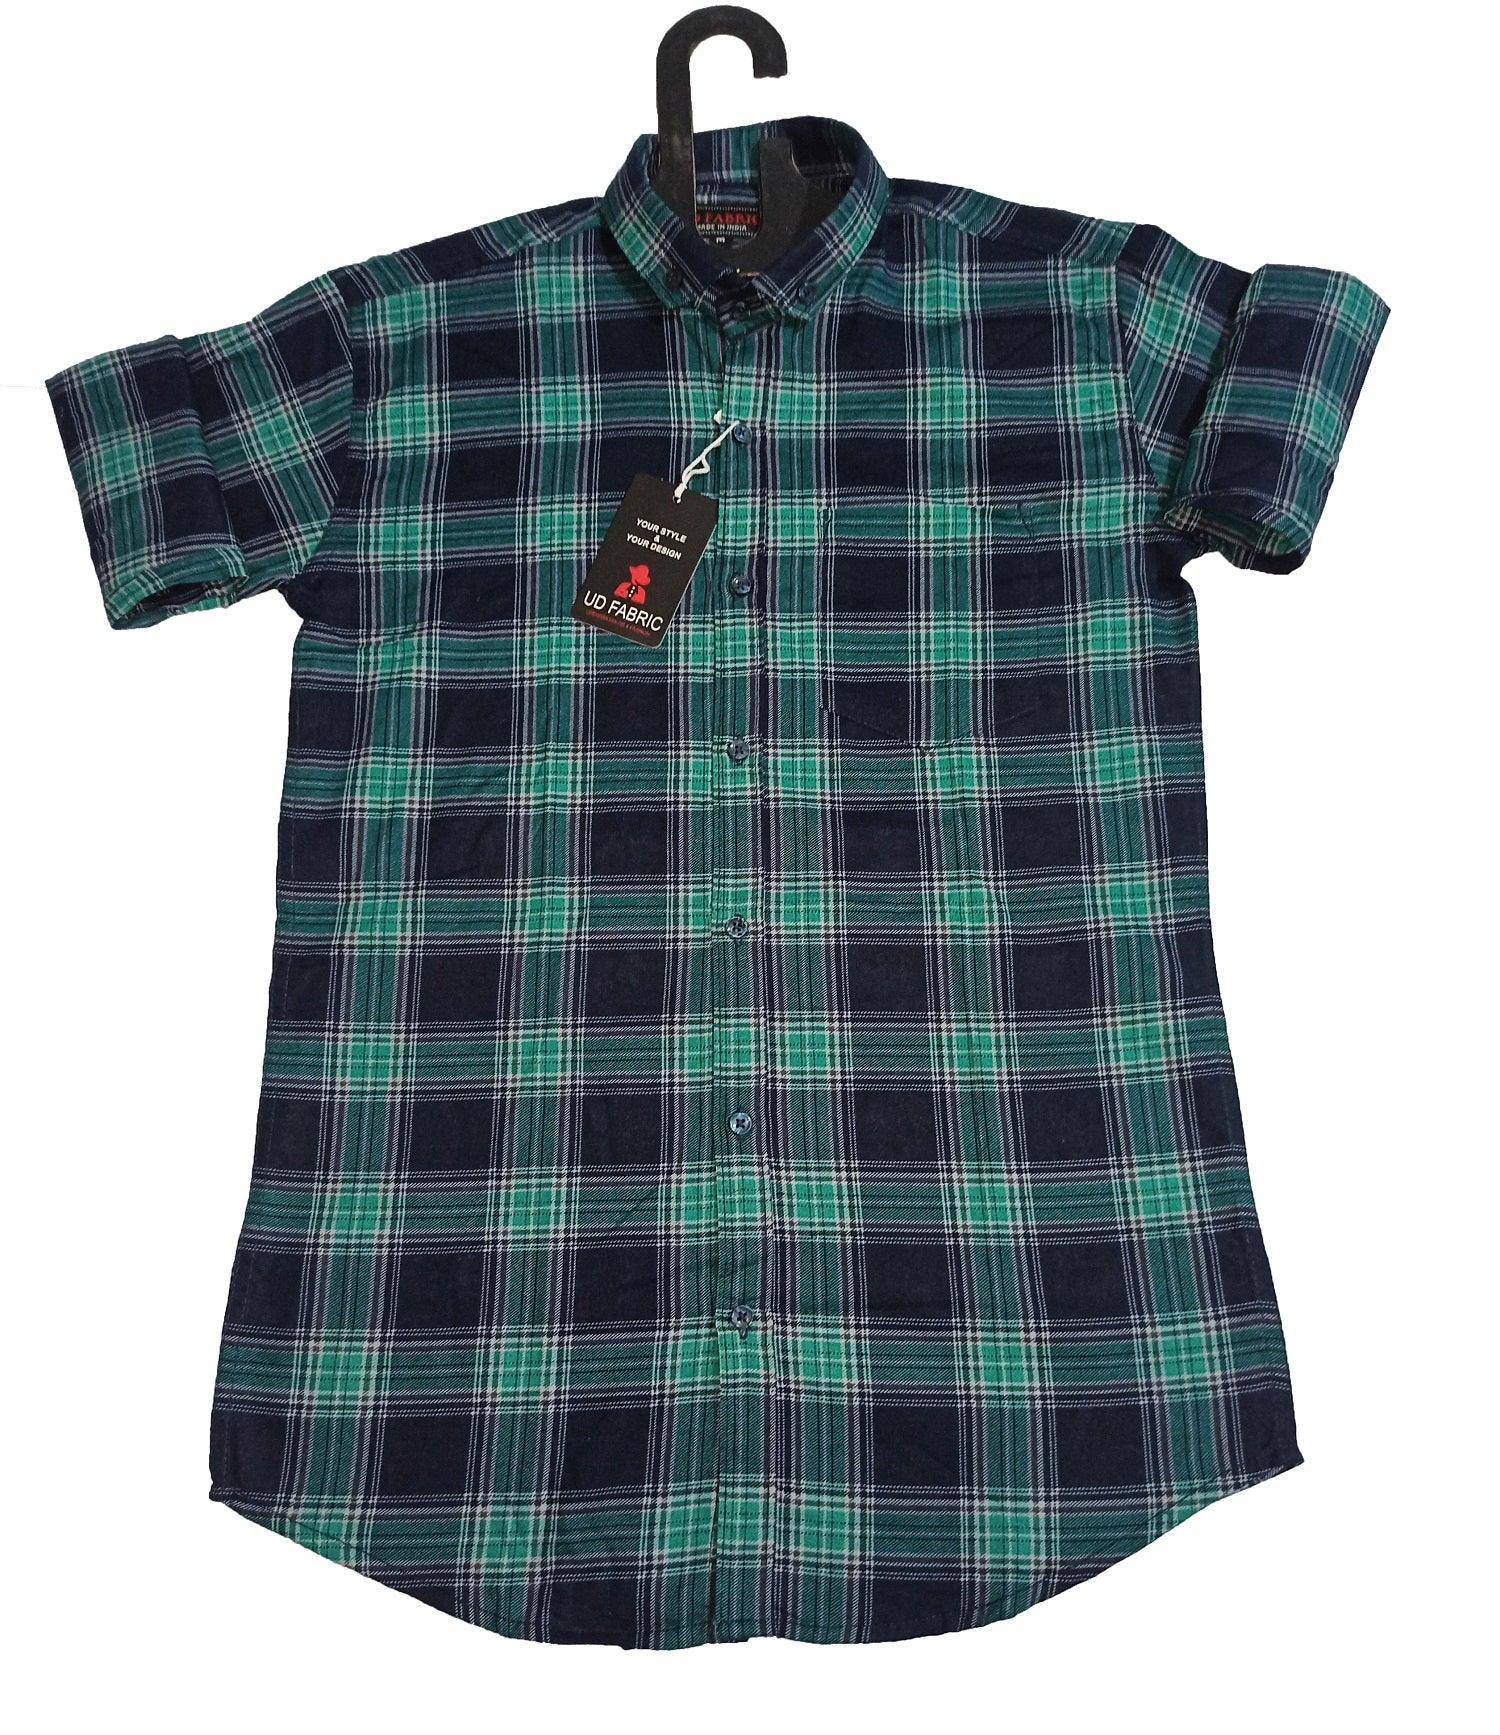 UD FABRIC Men’s Slim Fit Check Casual Shirt -Dark-Green - UD FABRIC - Your Style our Design